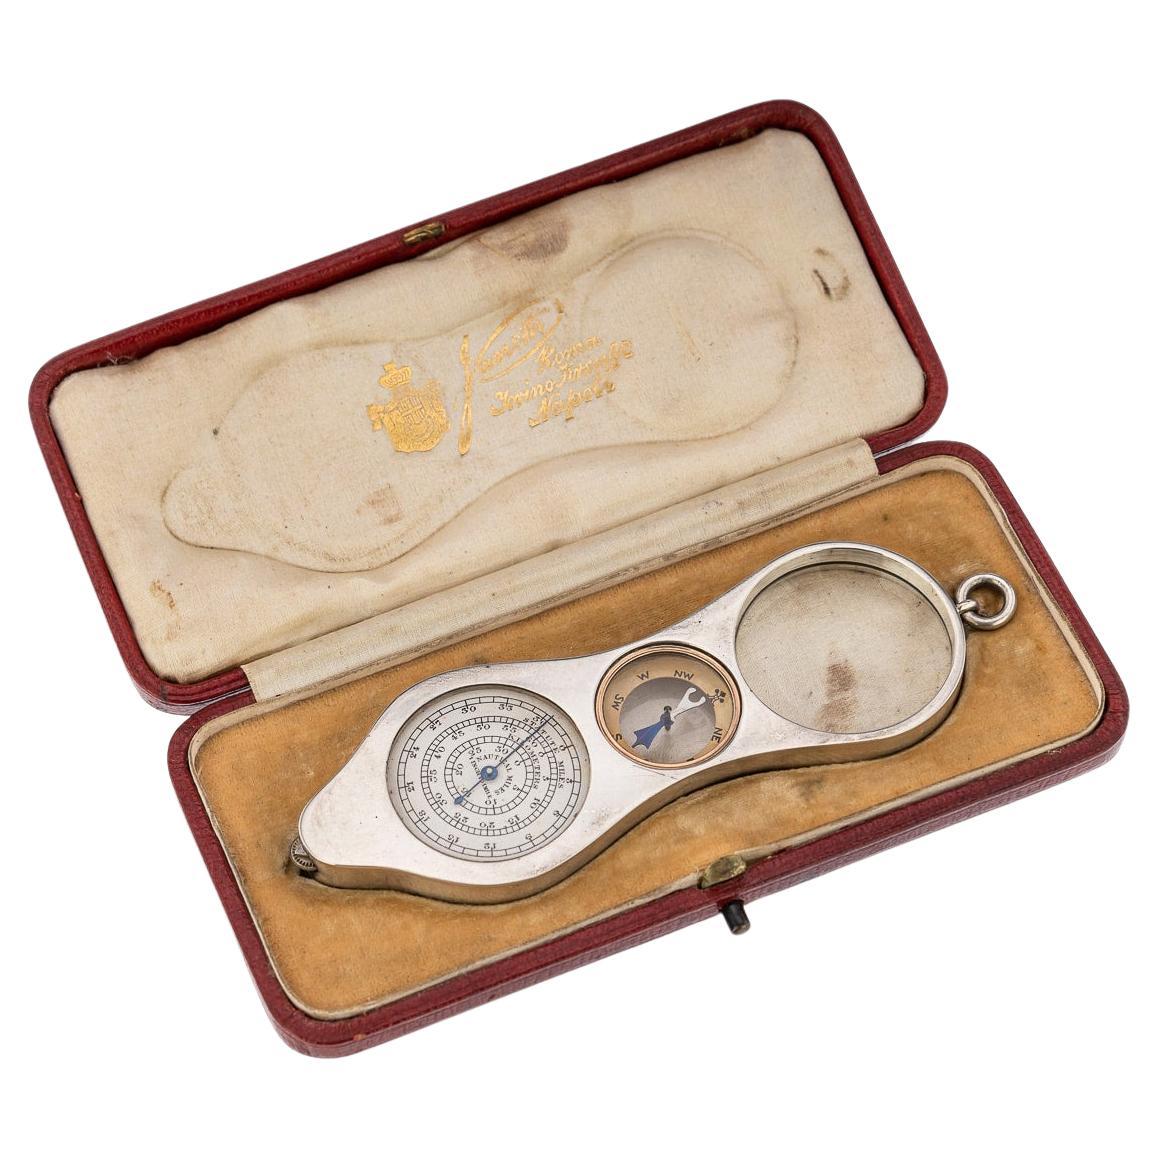 20th Century Edwardian Solid Silver Map Reading Tool, London, c.1908